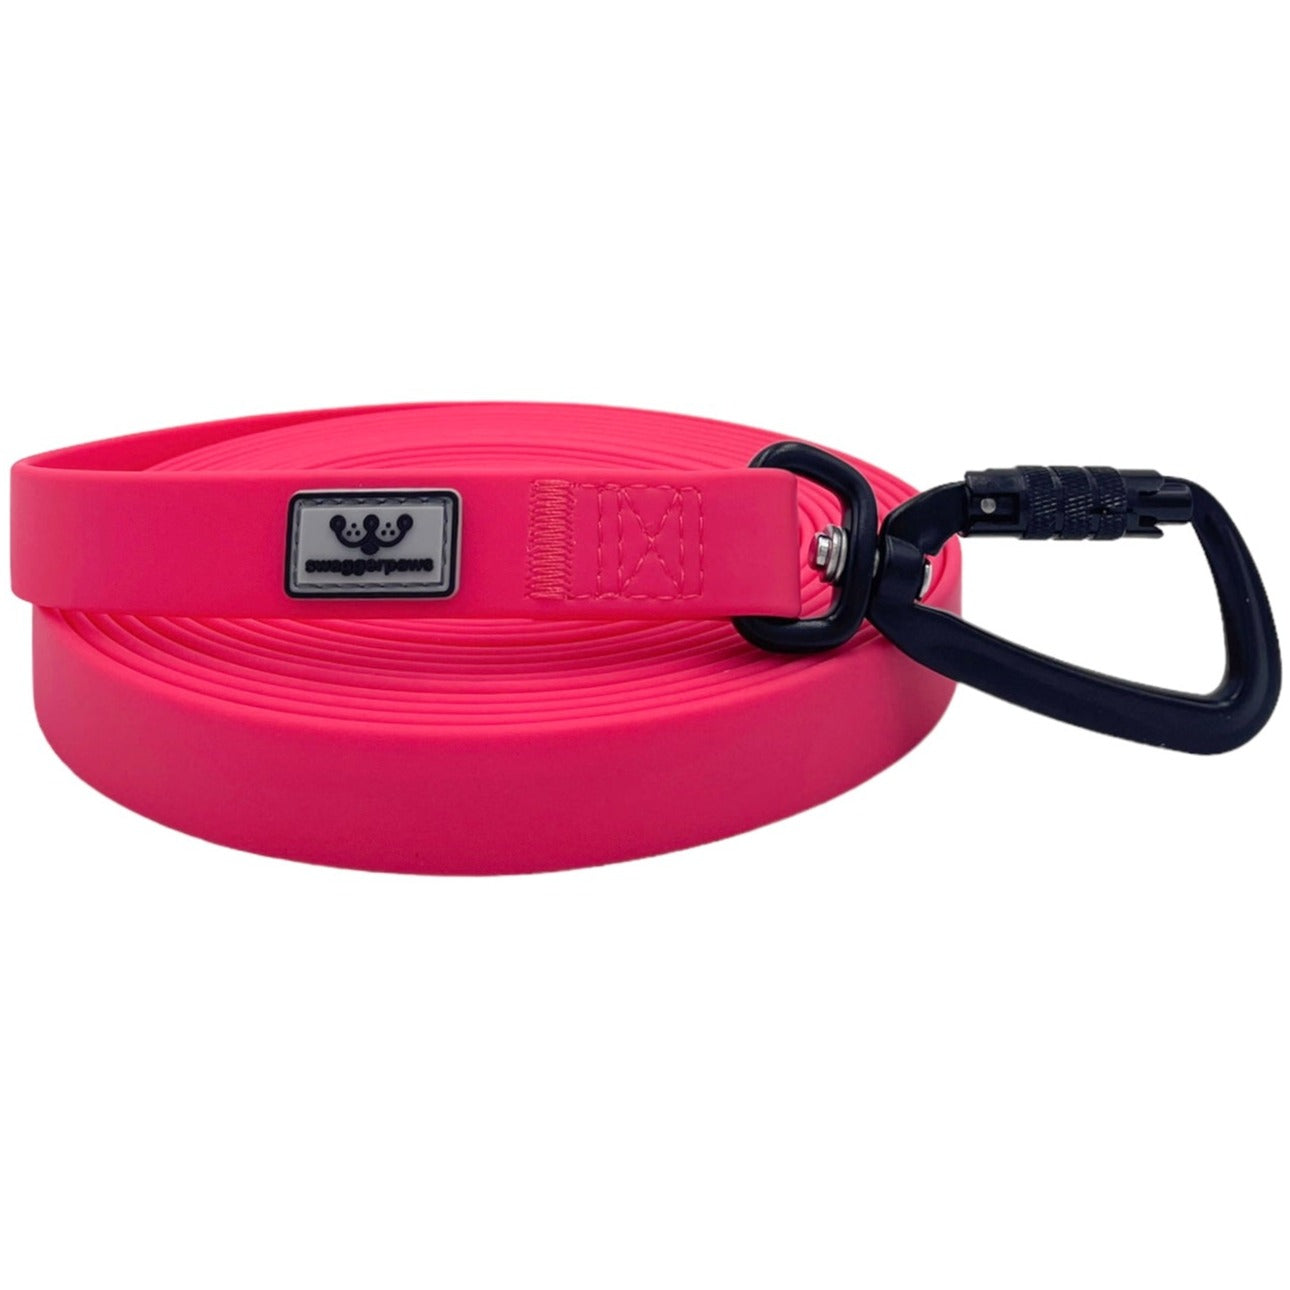 SwaggerPaws waterproof long line dog lead with auto-lock carabiner, raspberry red